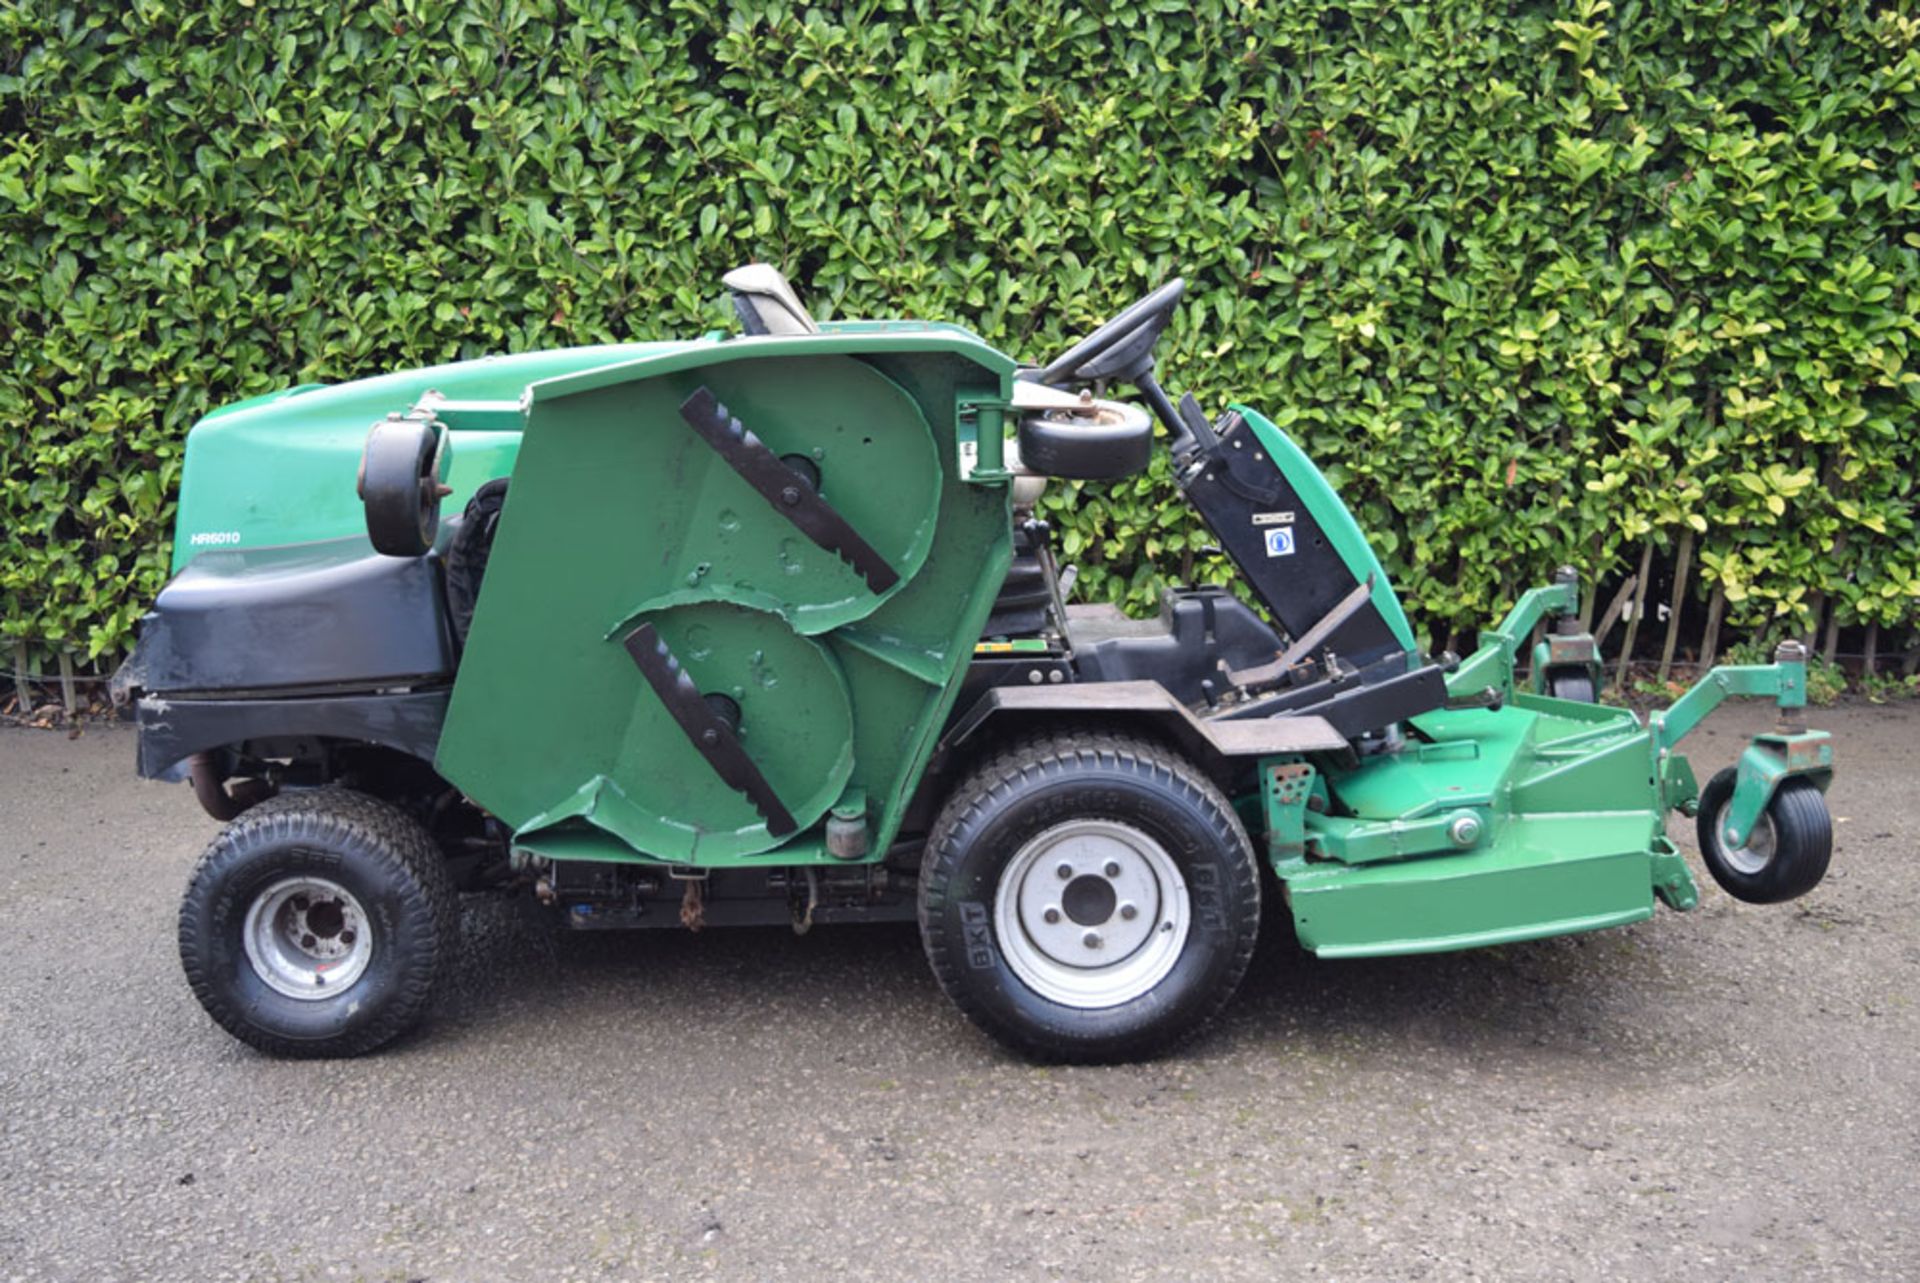 Ransomes HR6010 Wide Area Cut Ride On Rotary Mower - Image 2 of 3